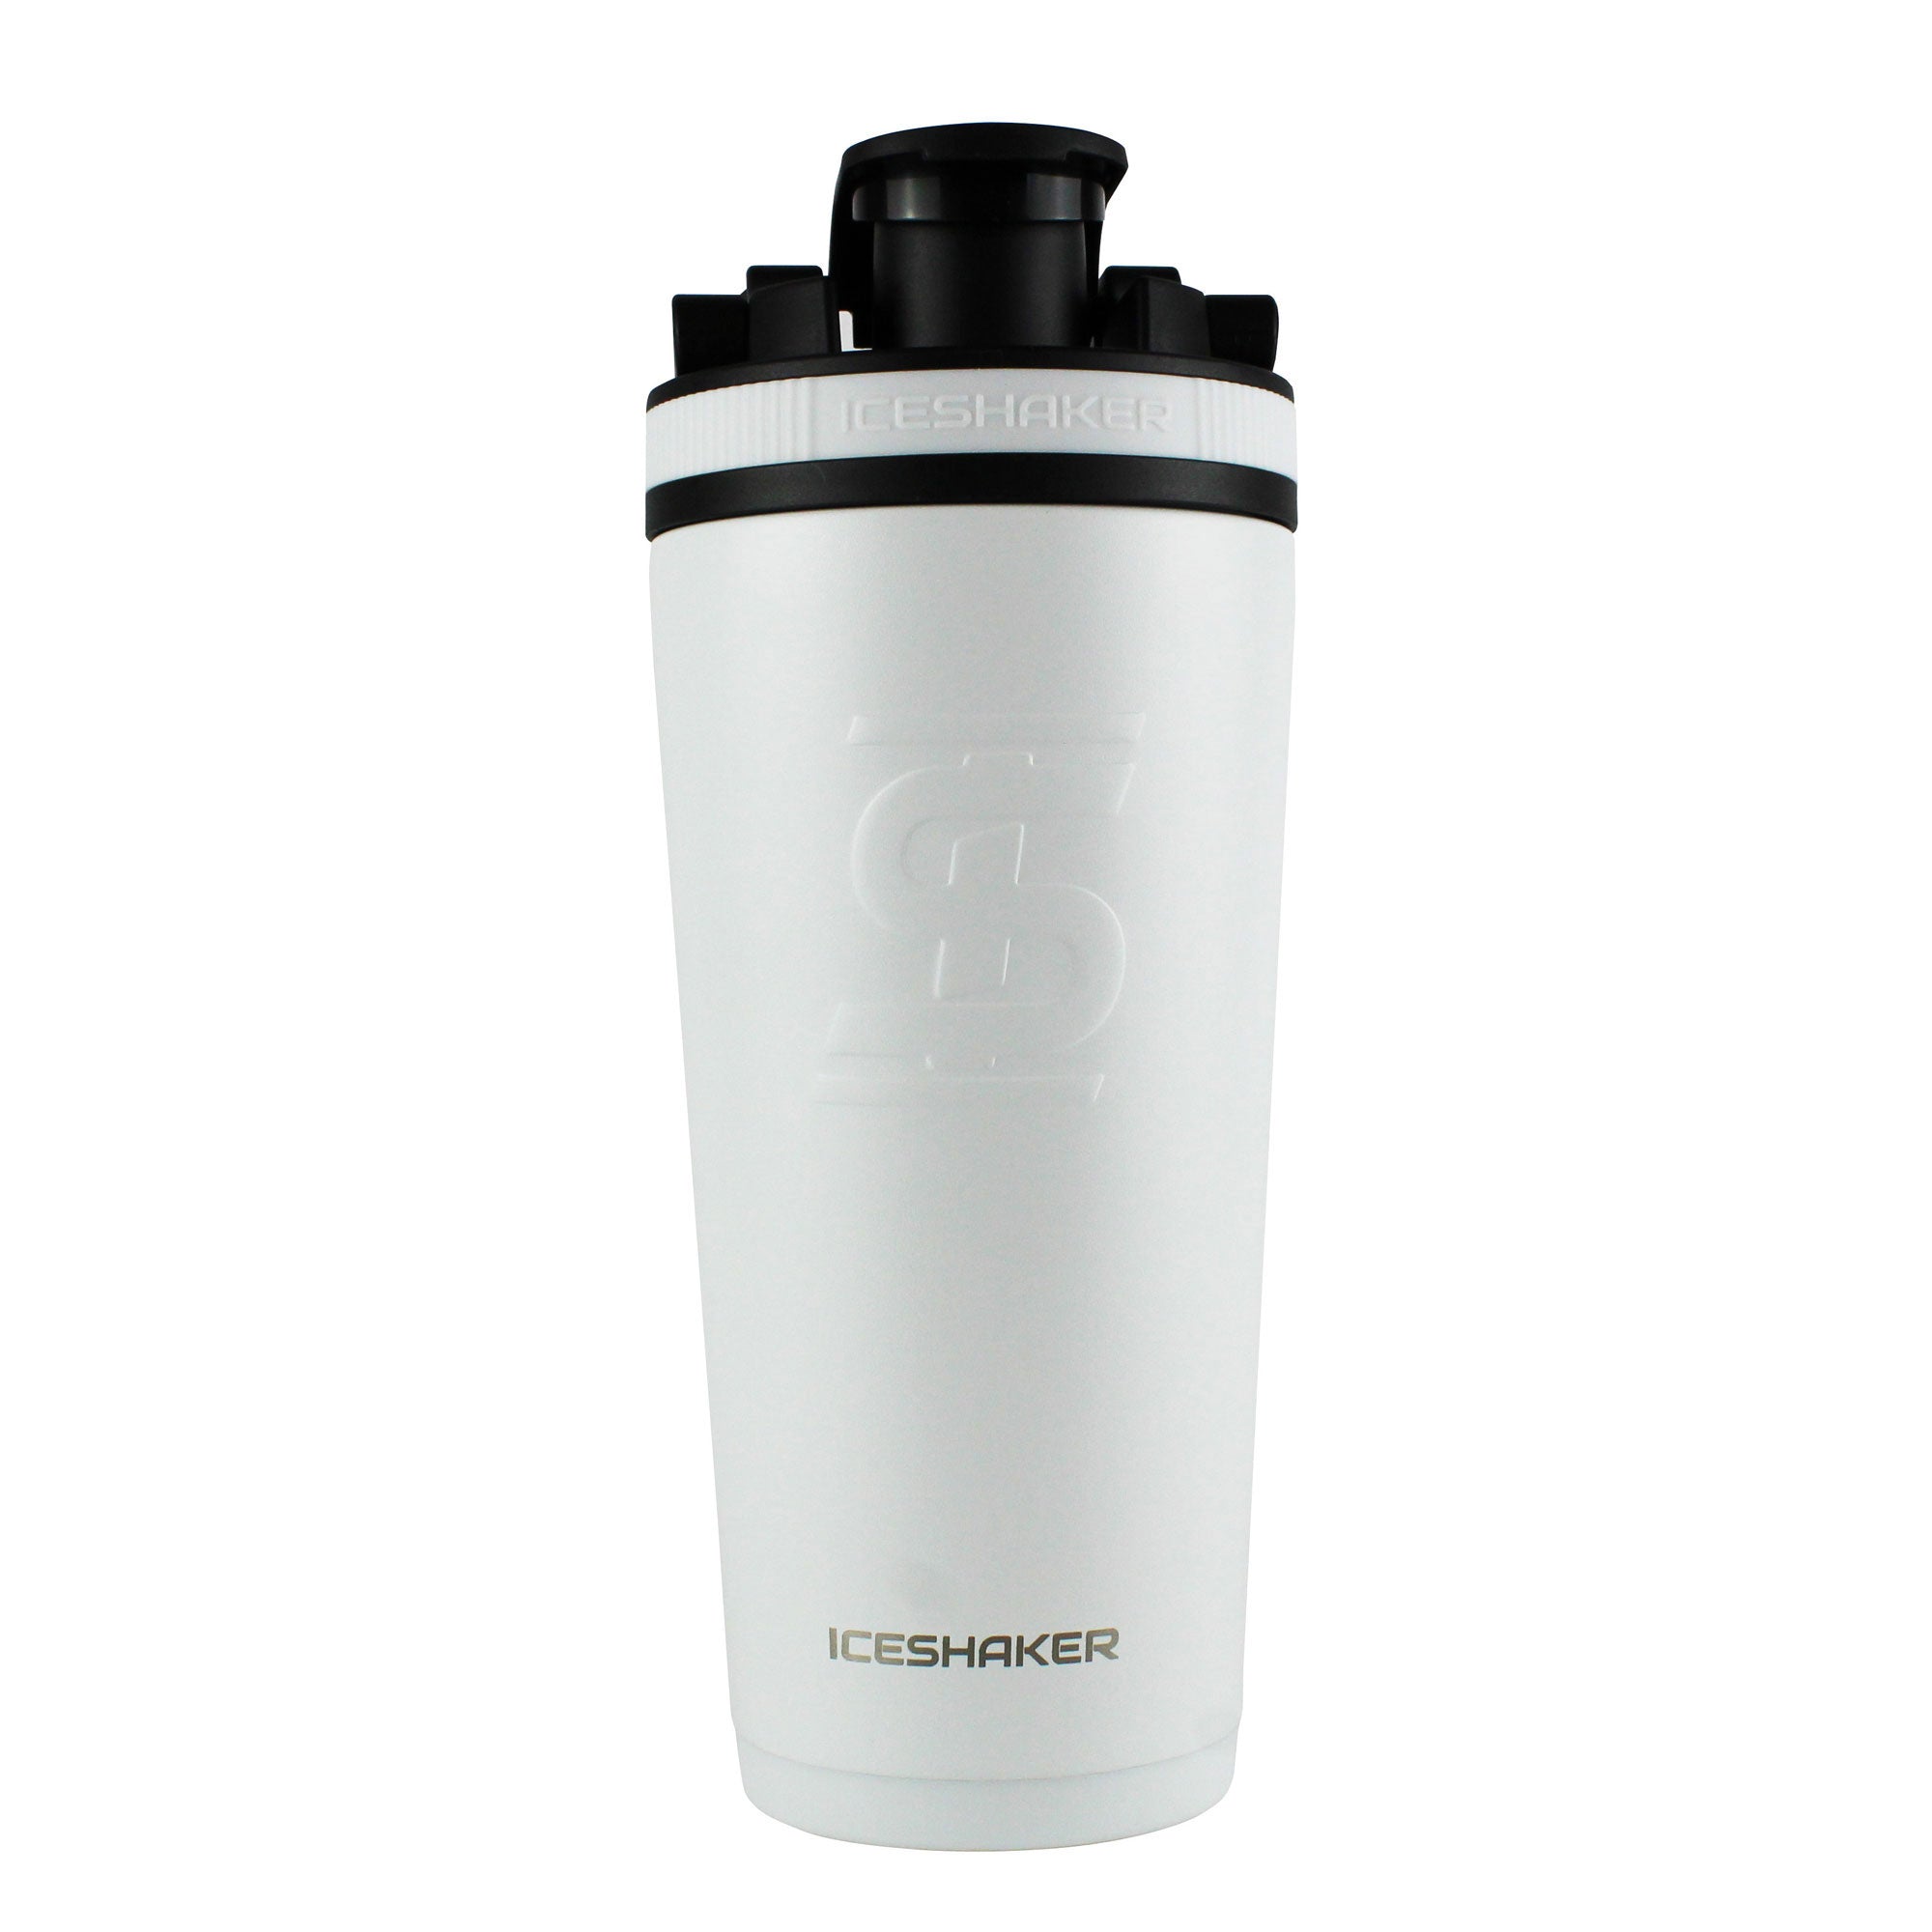 Officially Licensed University of Tennessee 26oz Ice Shaker - White